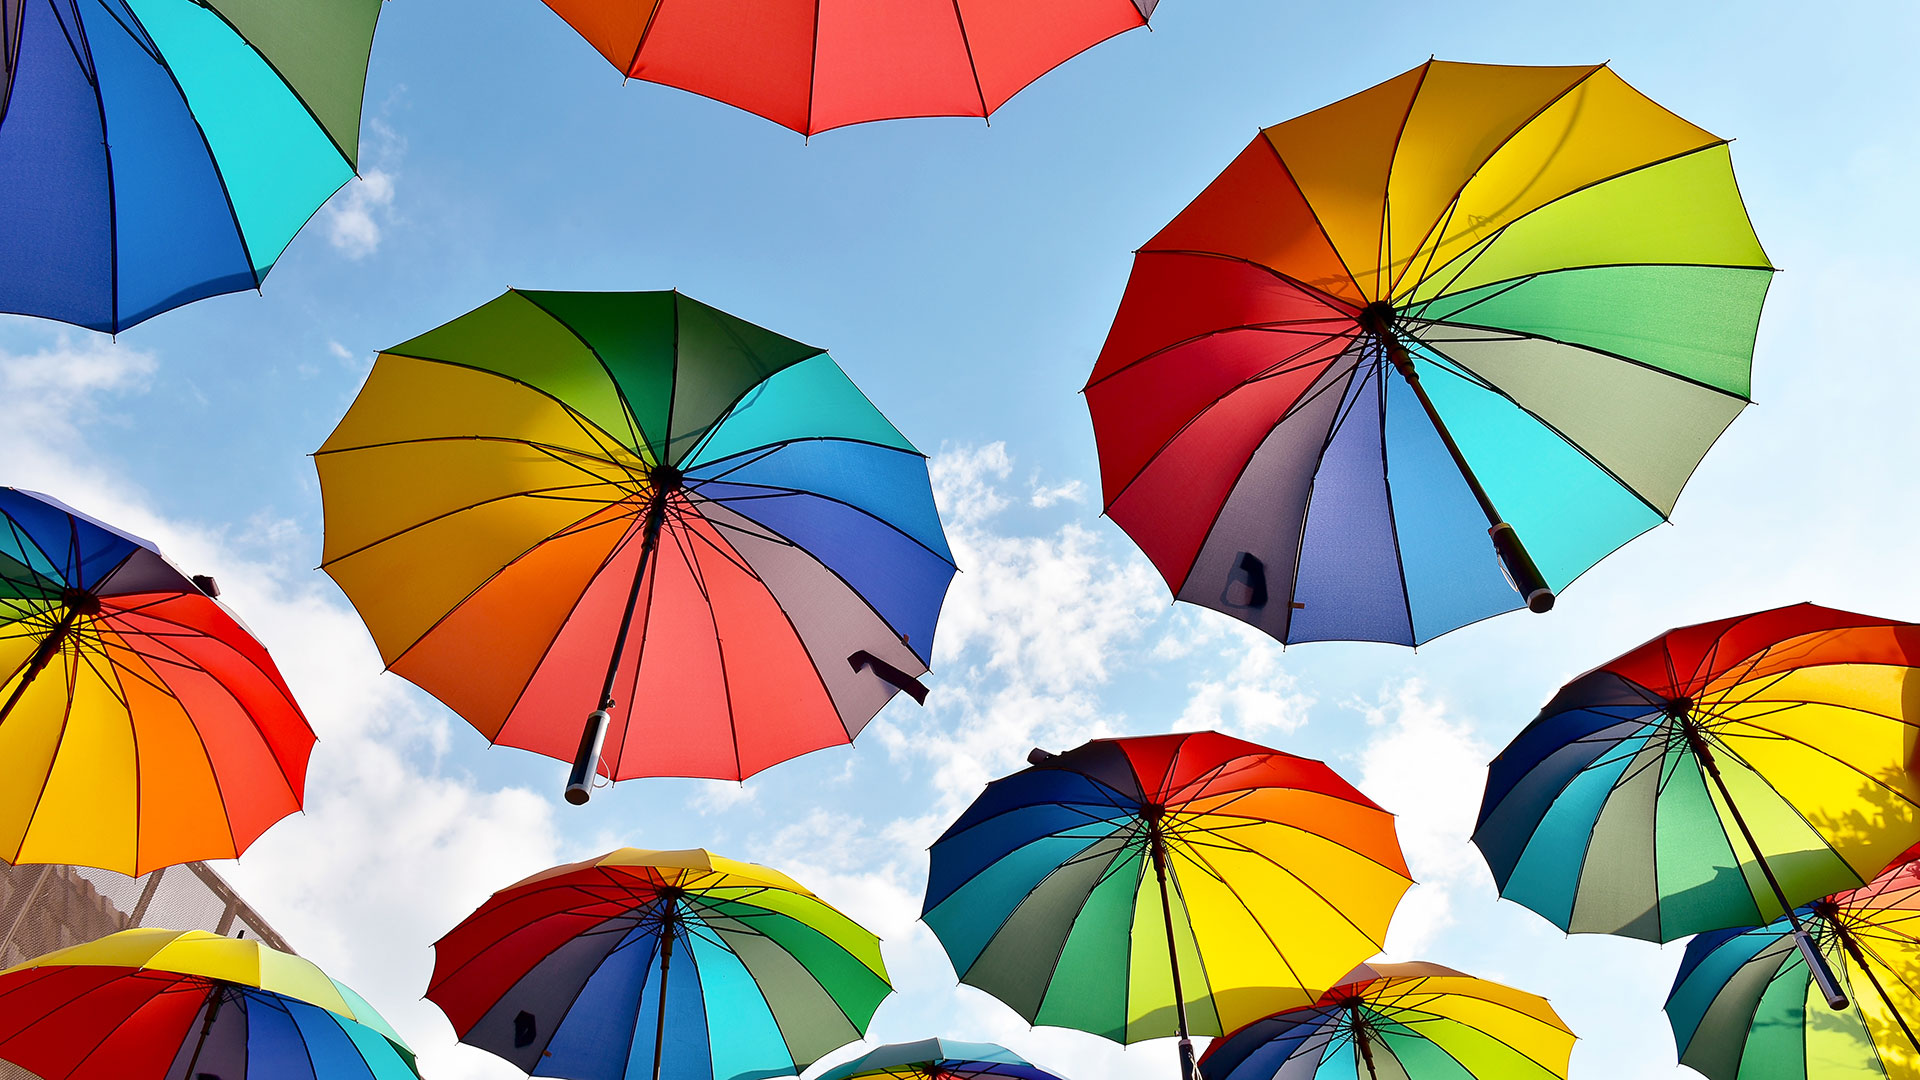 Image of multi-colored open umbrella's floating in sky